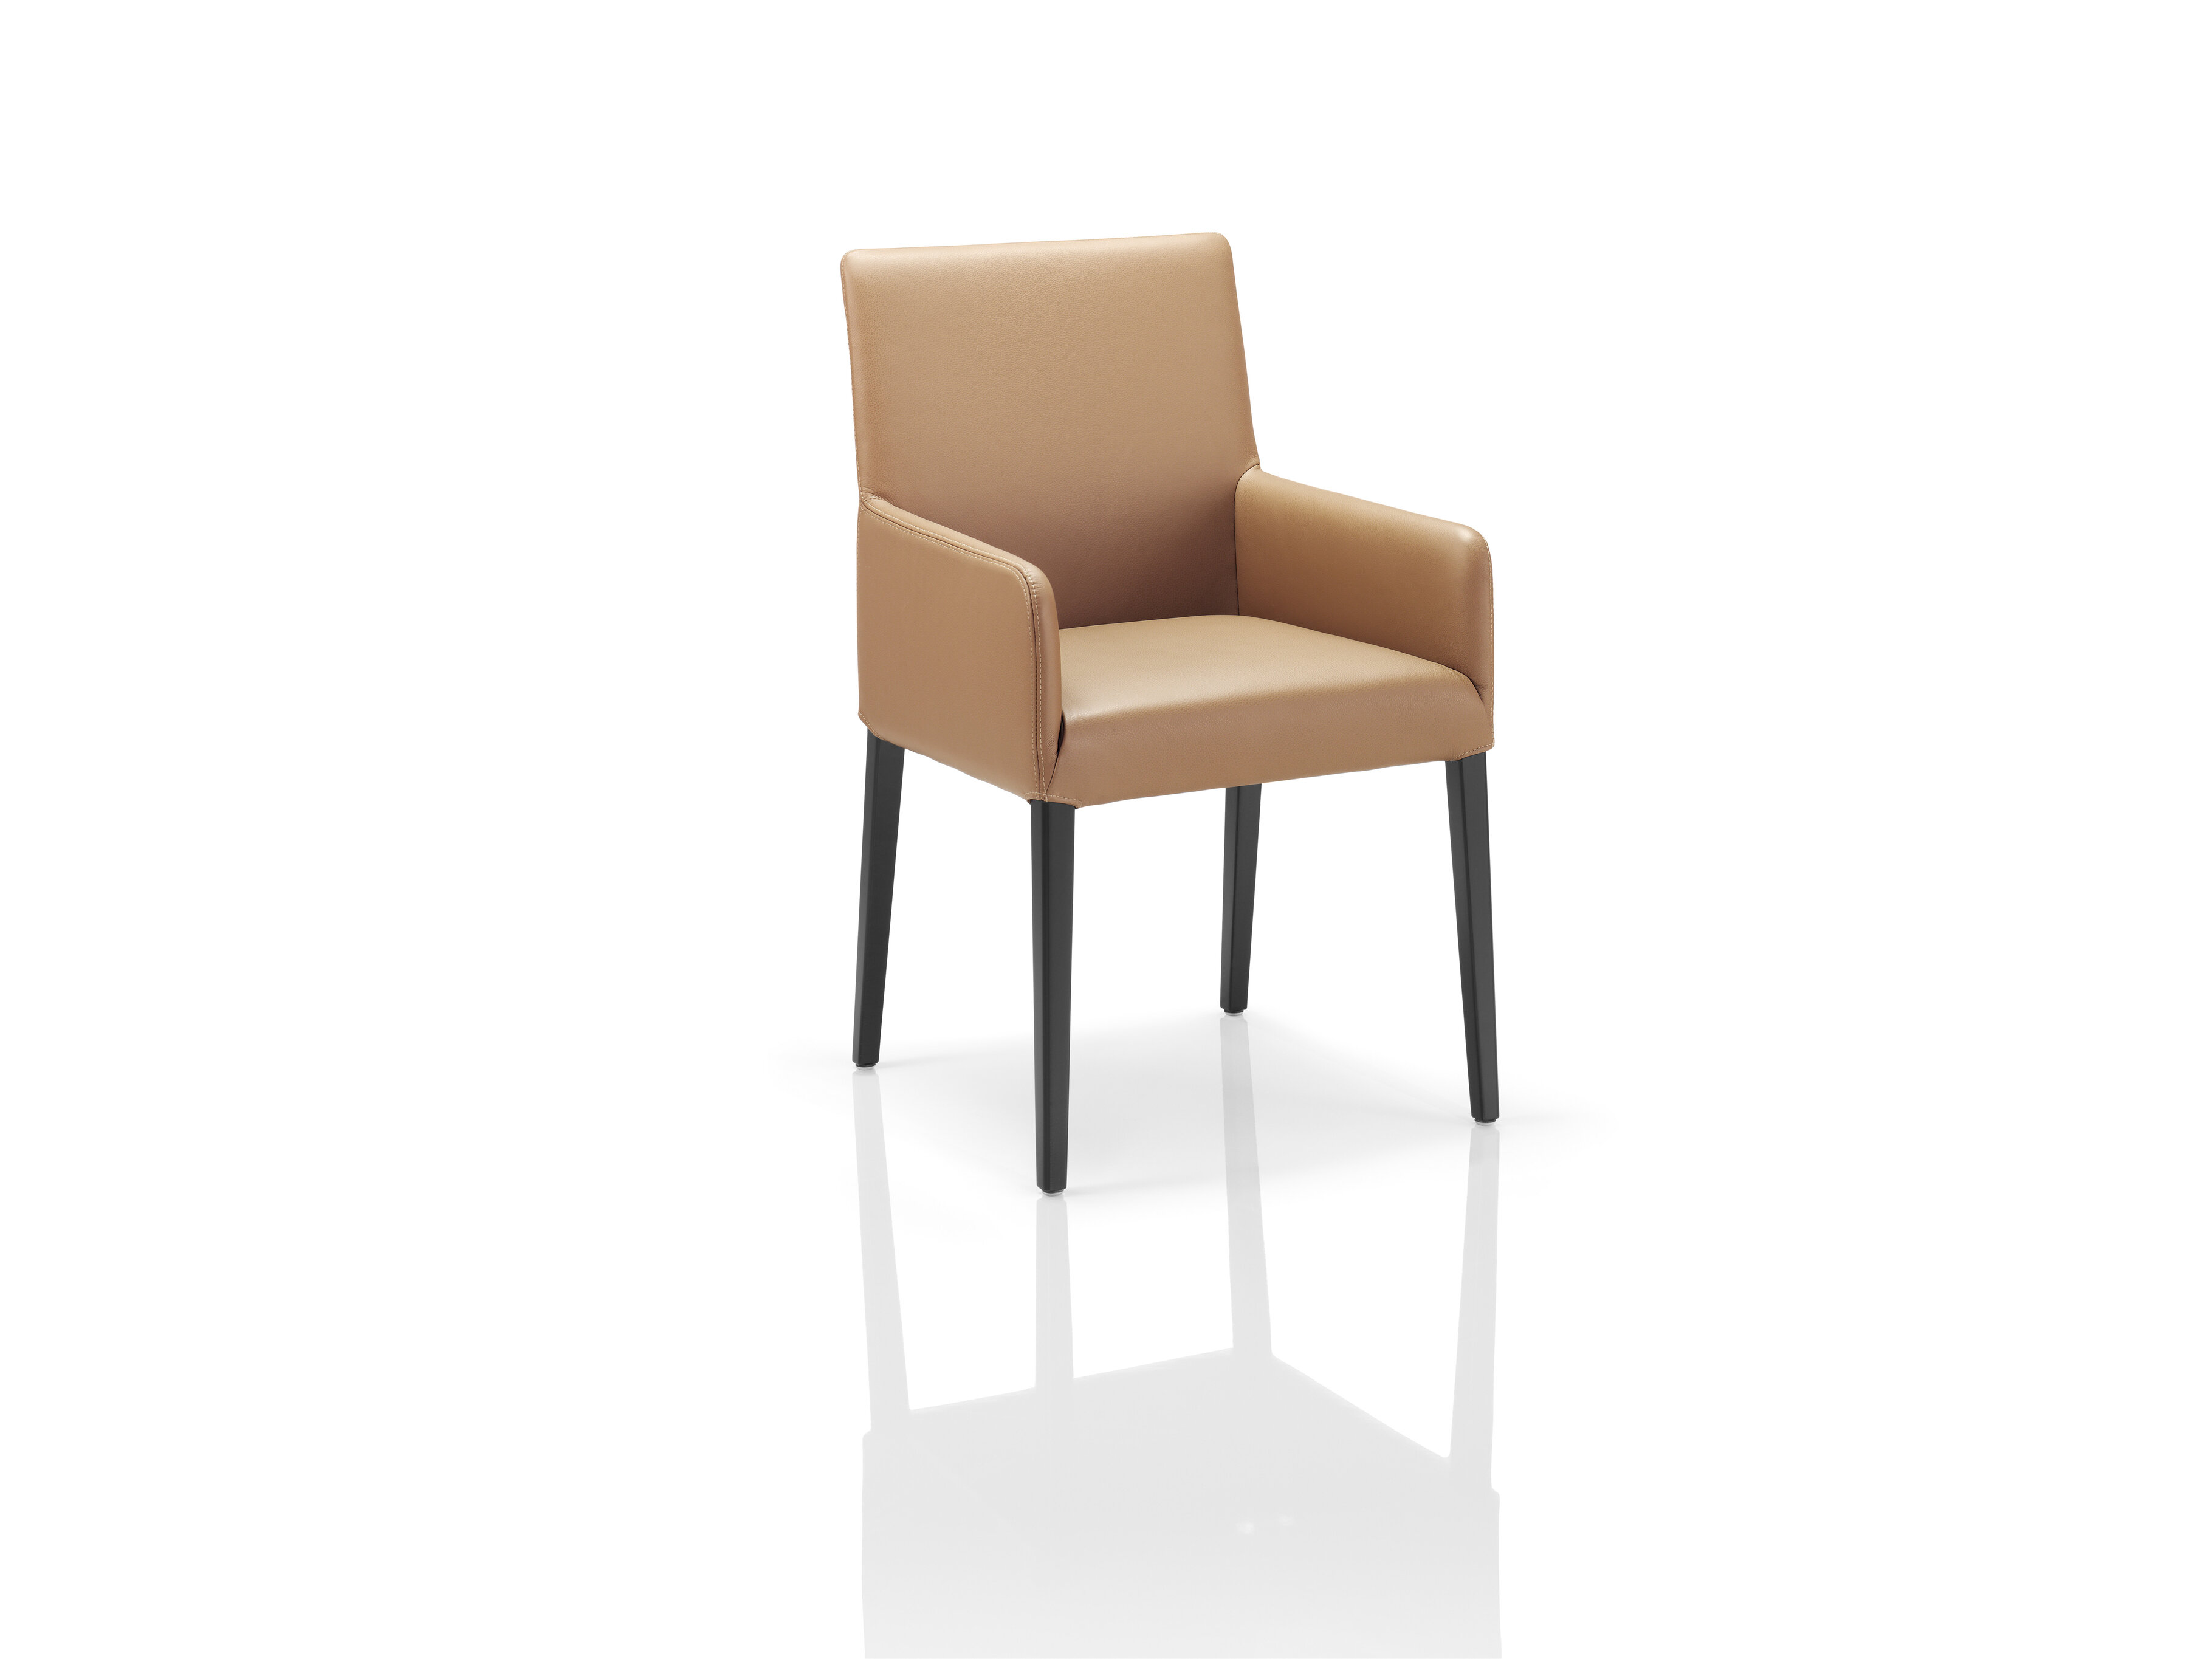 Nils chair with armrests in genuin ocher